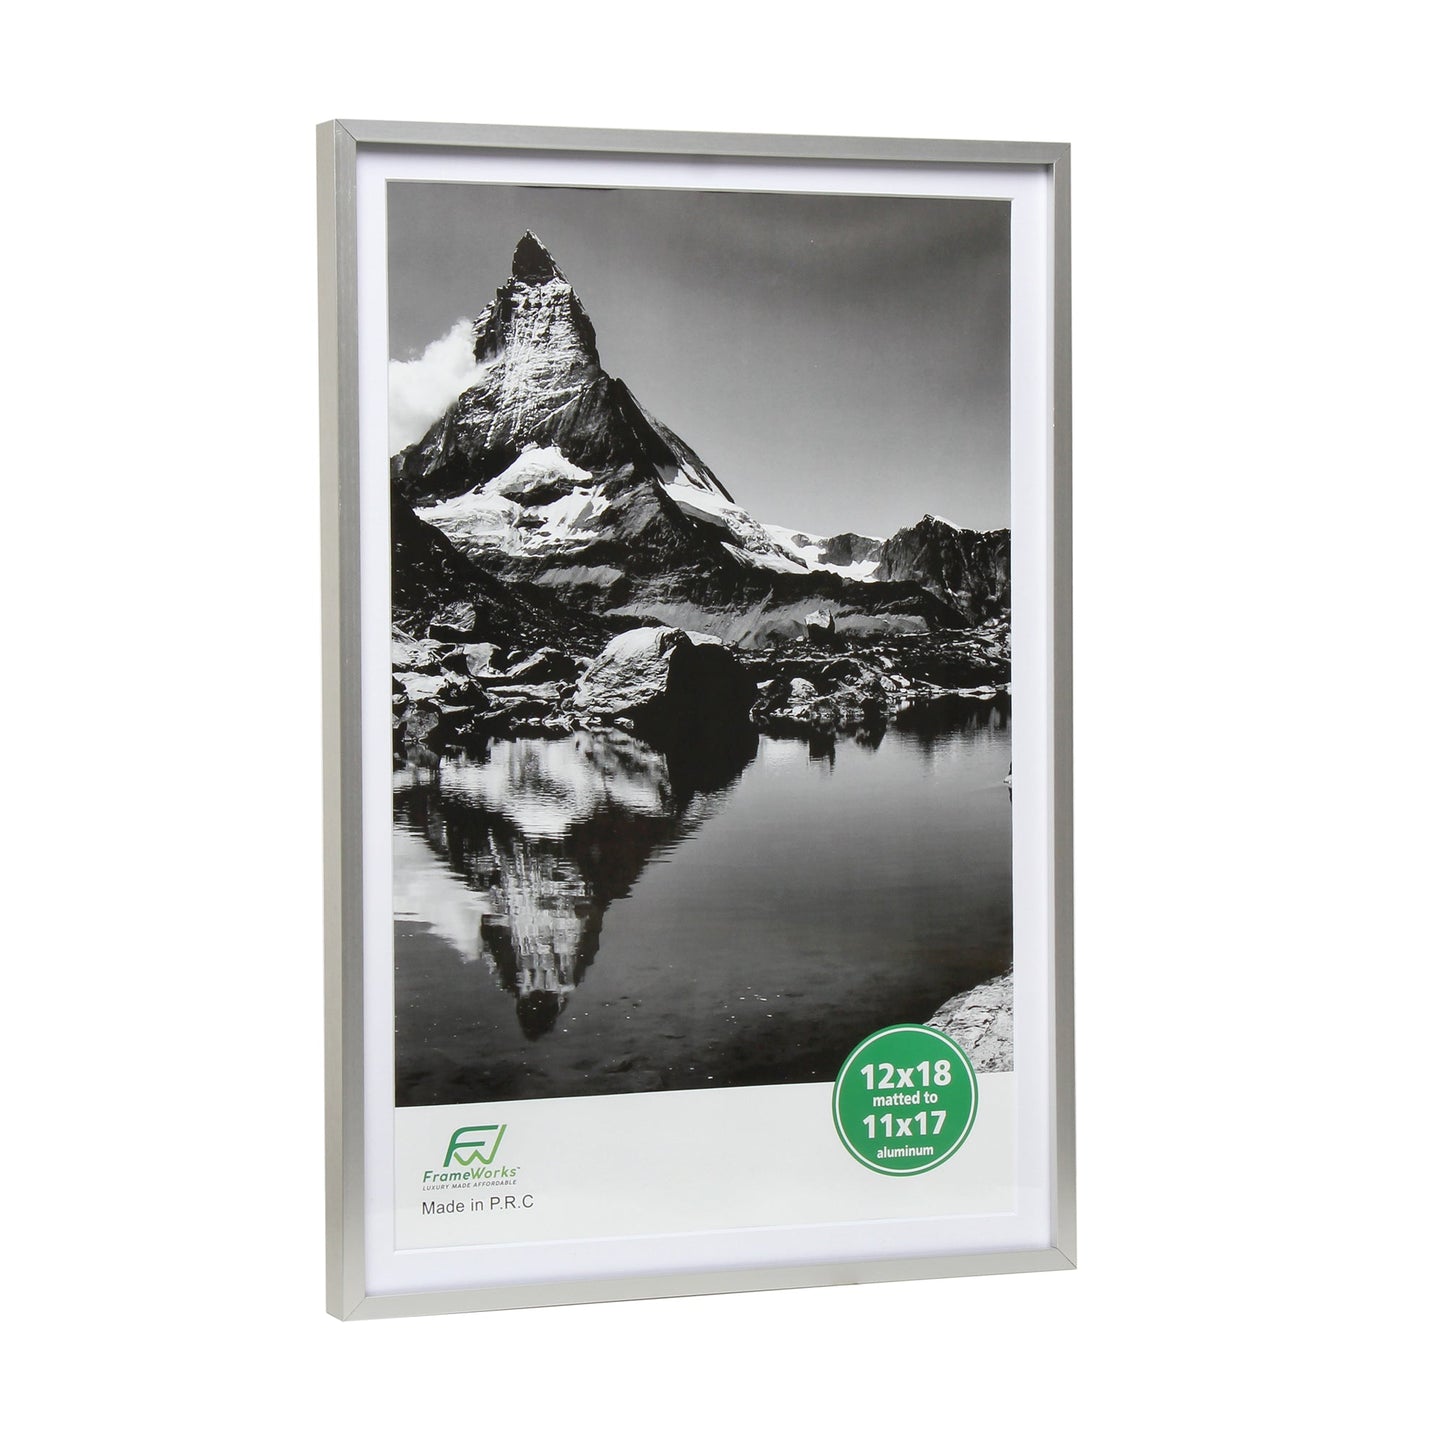 12" x 18" Deluxe Silver Aluminum Contemporary Picture Frame, 11" x 17" Matted